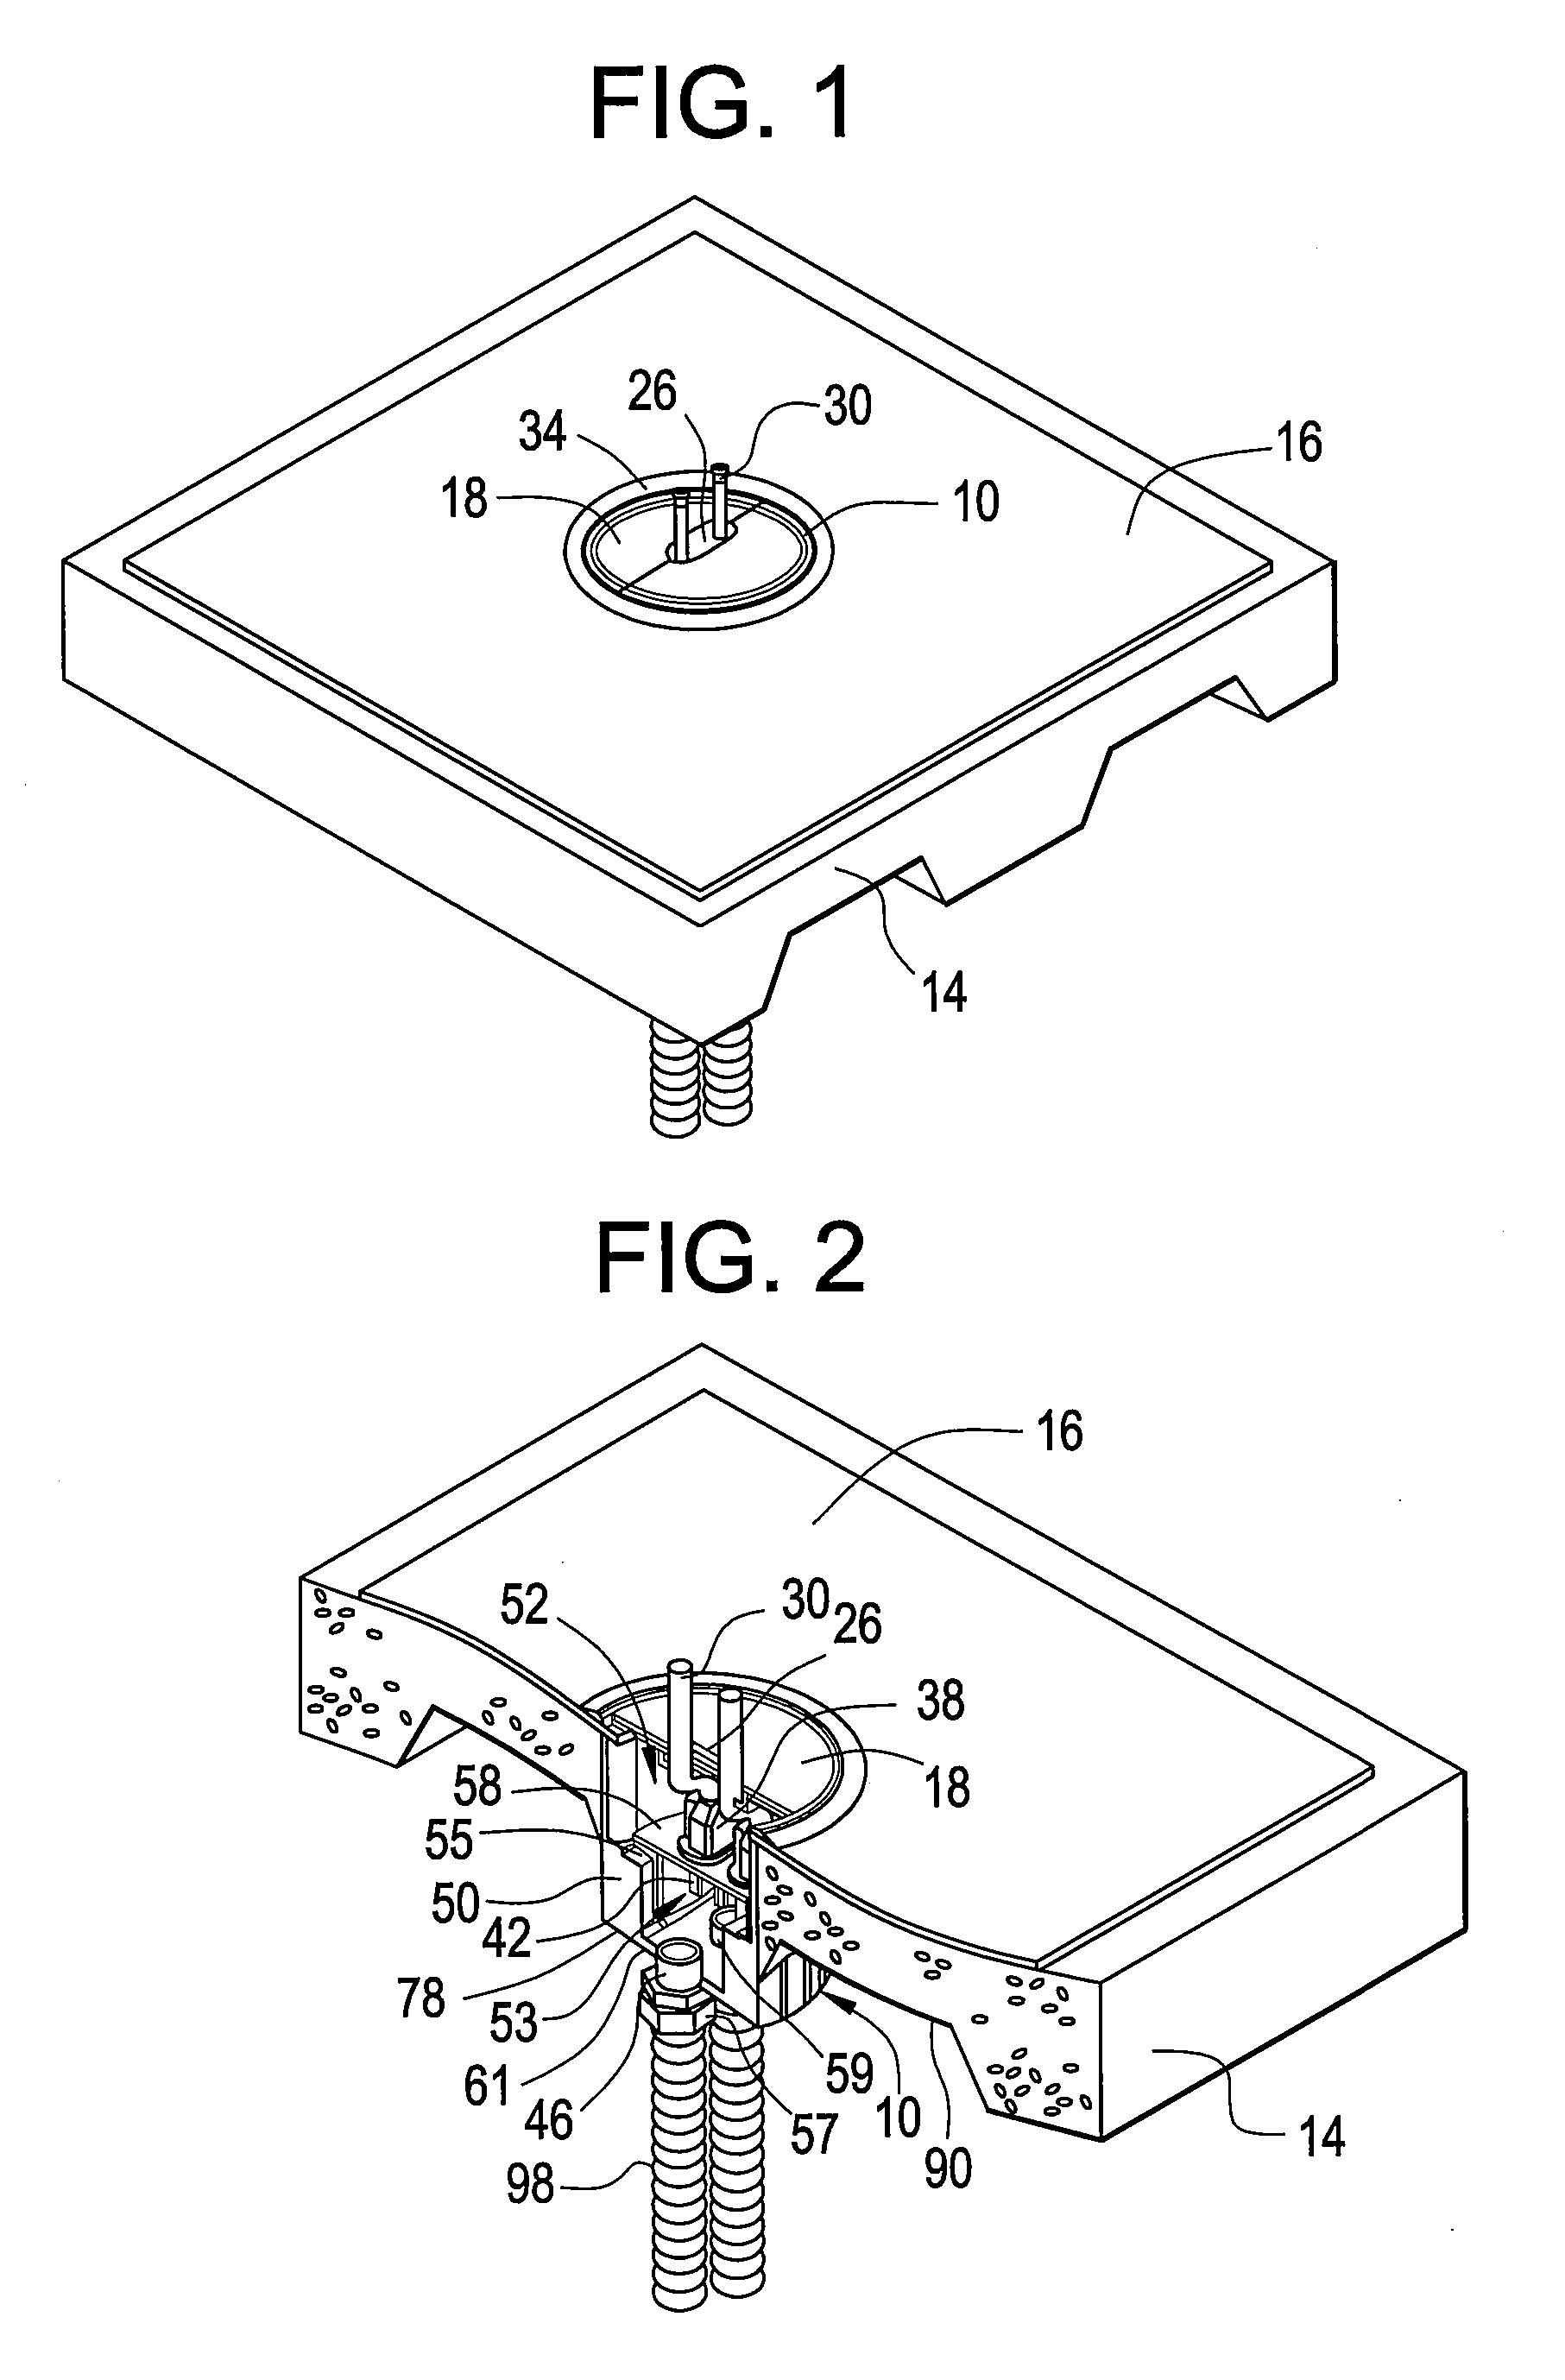 Retention and mounting bracket for recessed electrical outlet box